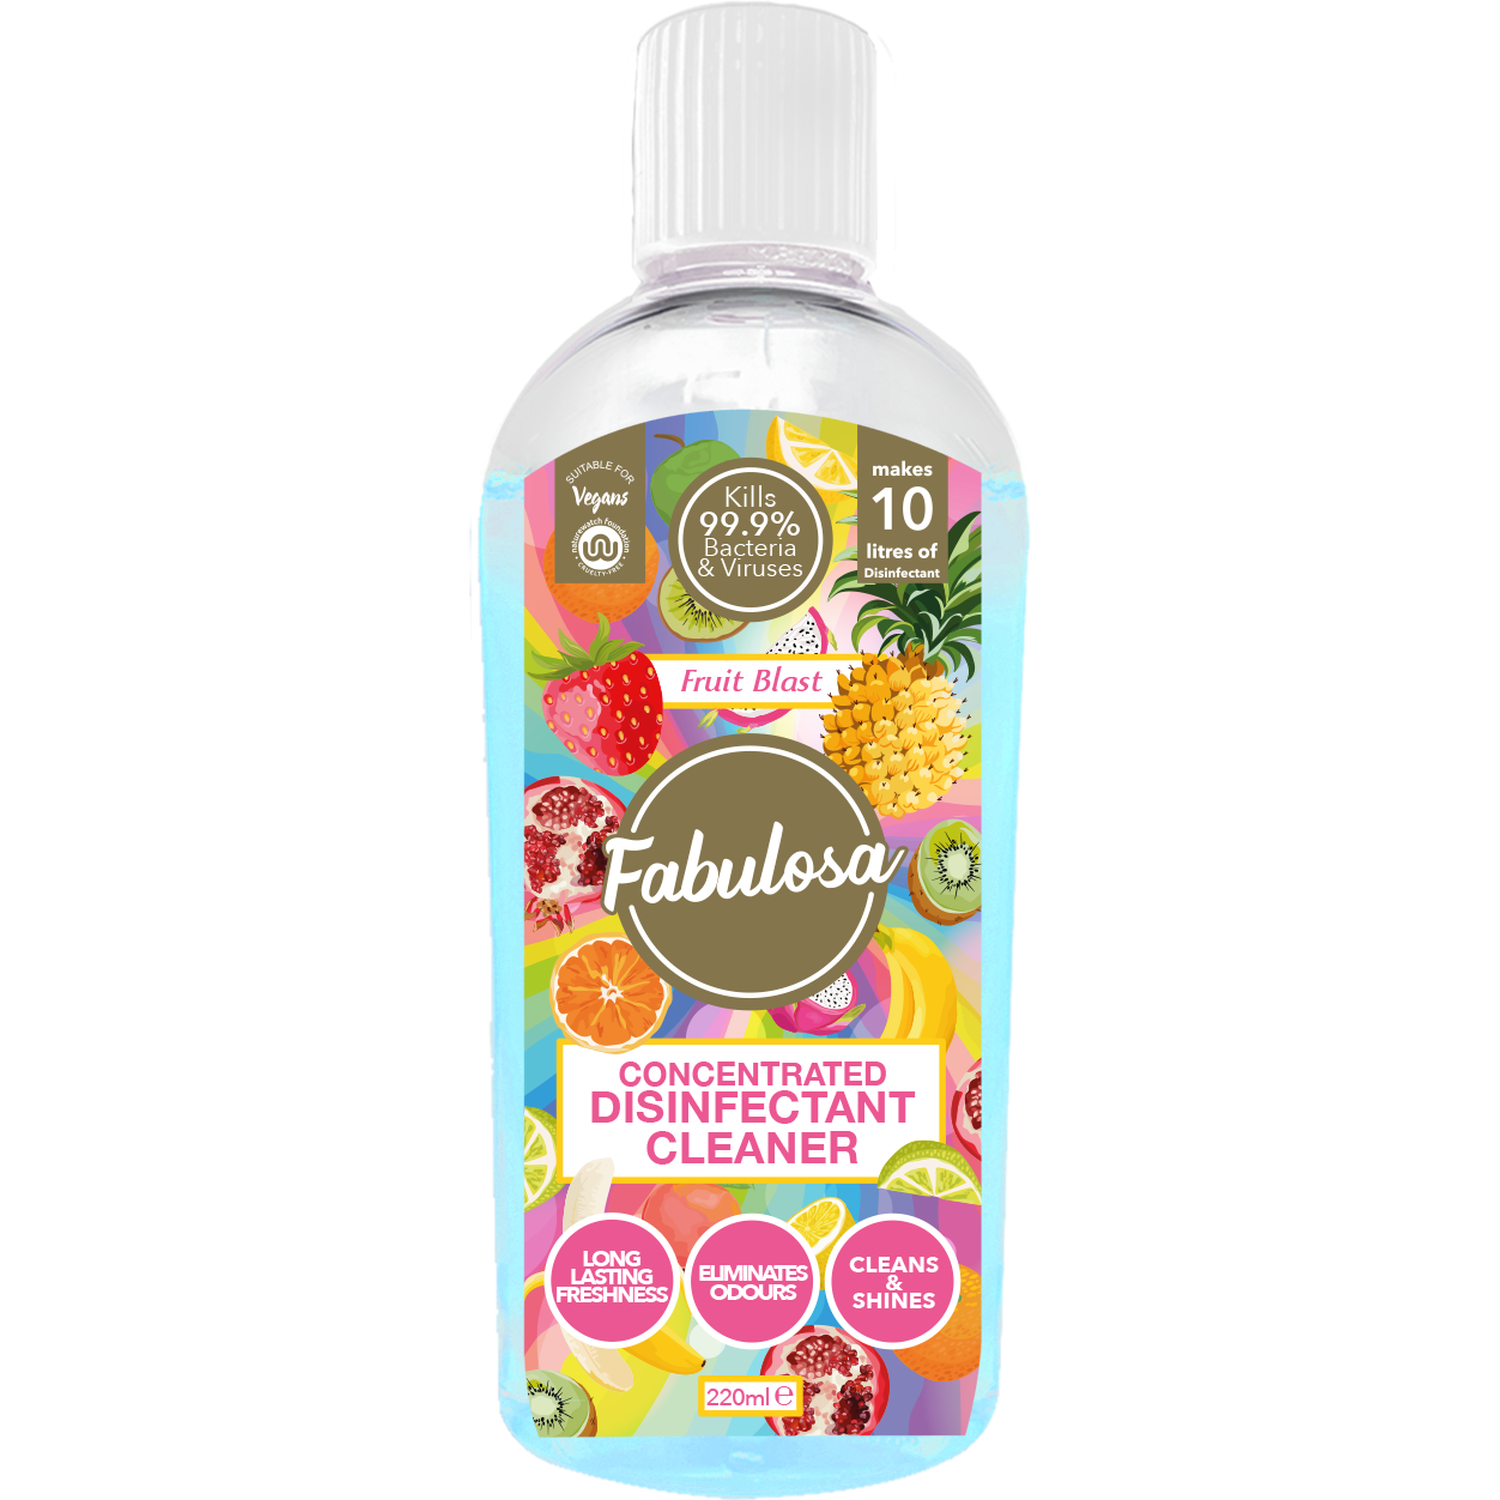 Fabulosa Concentrated Disinfectant - Fruit Blast Image